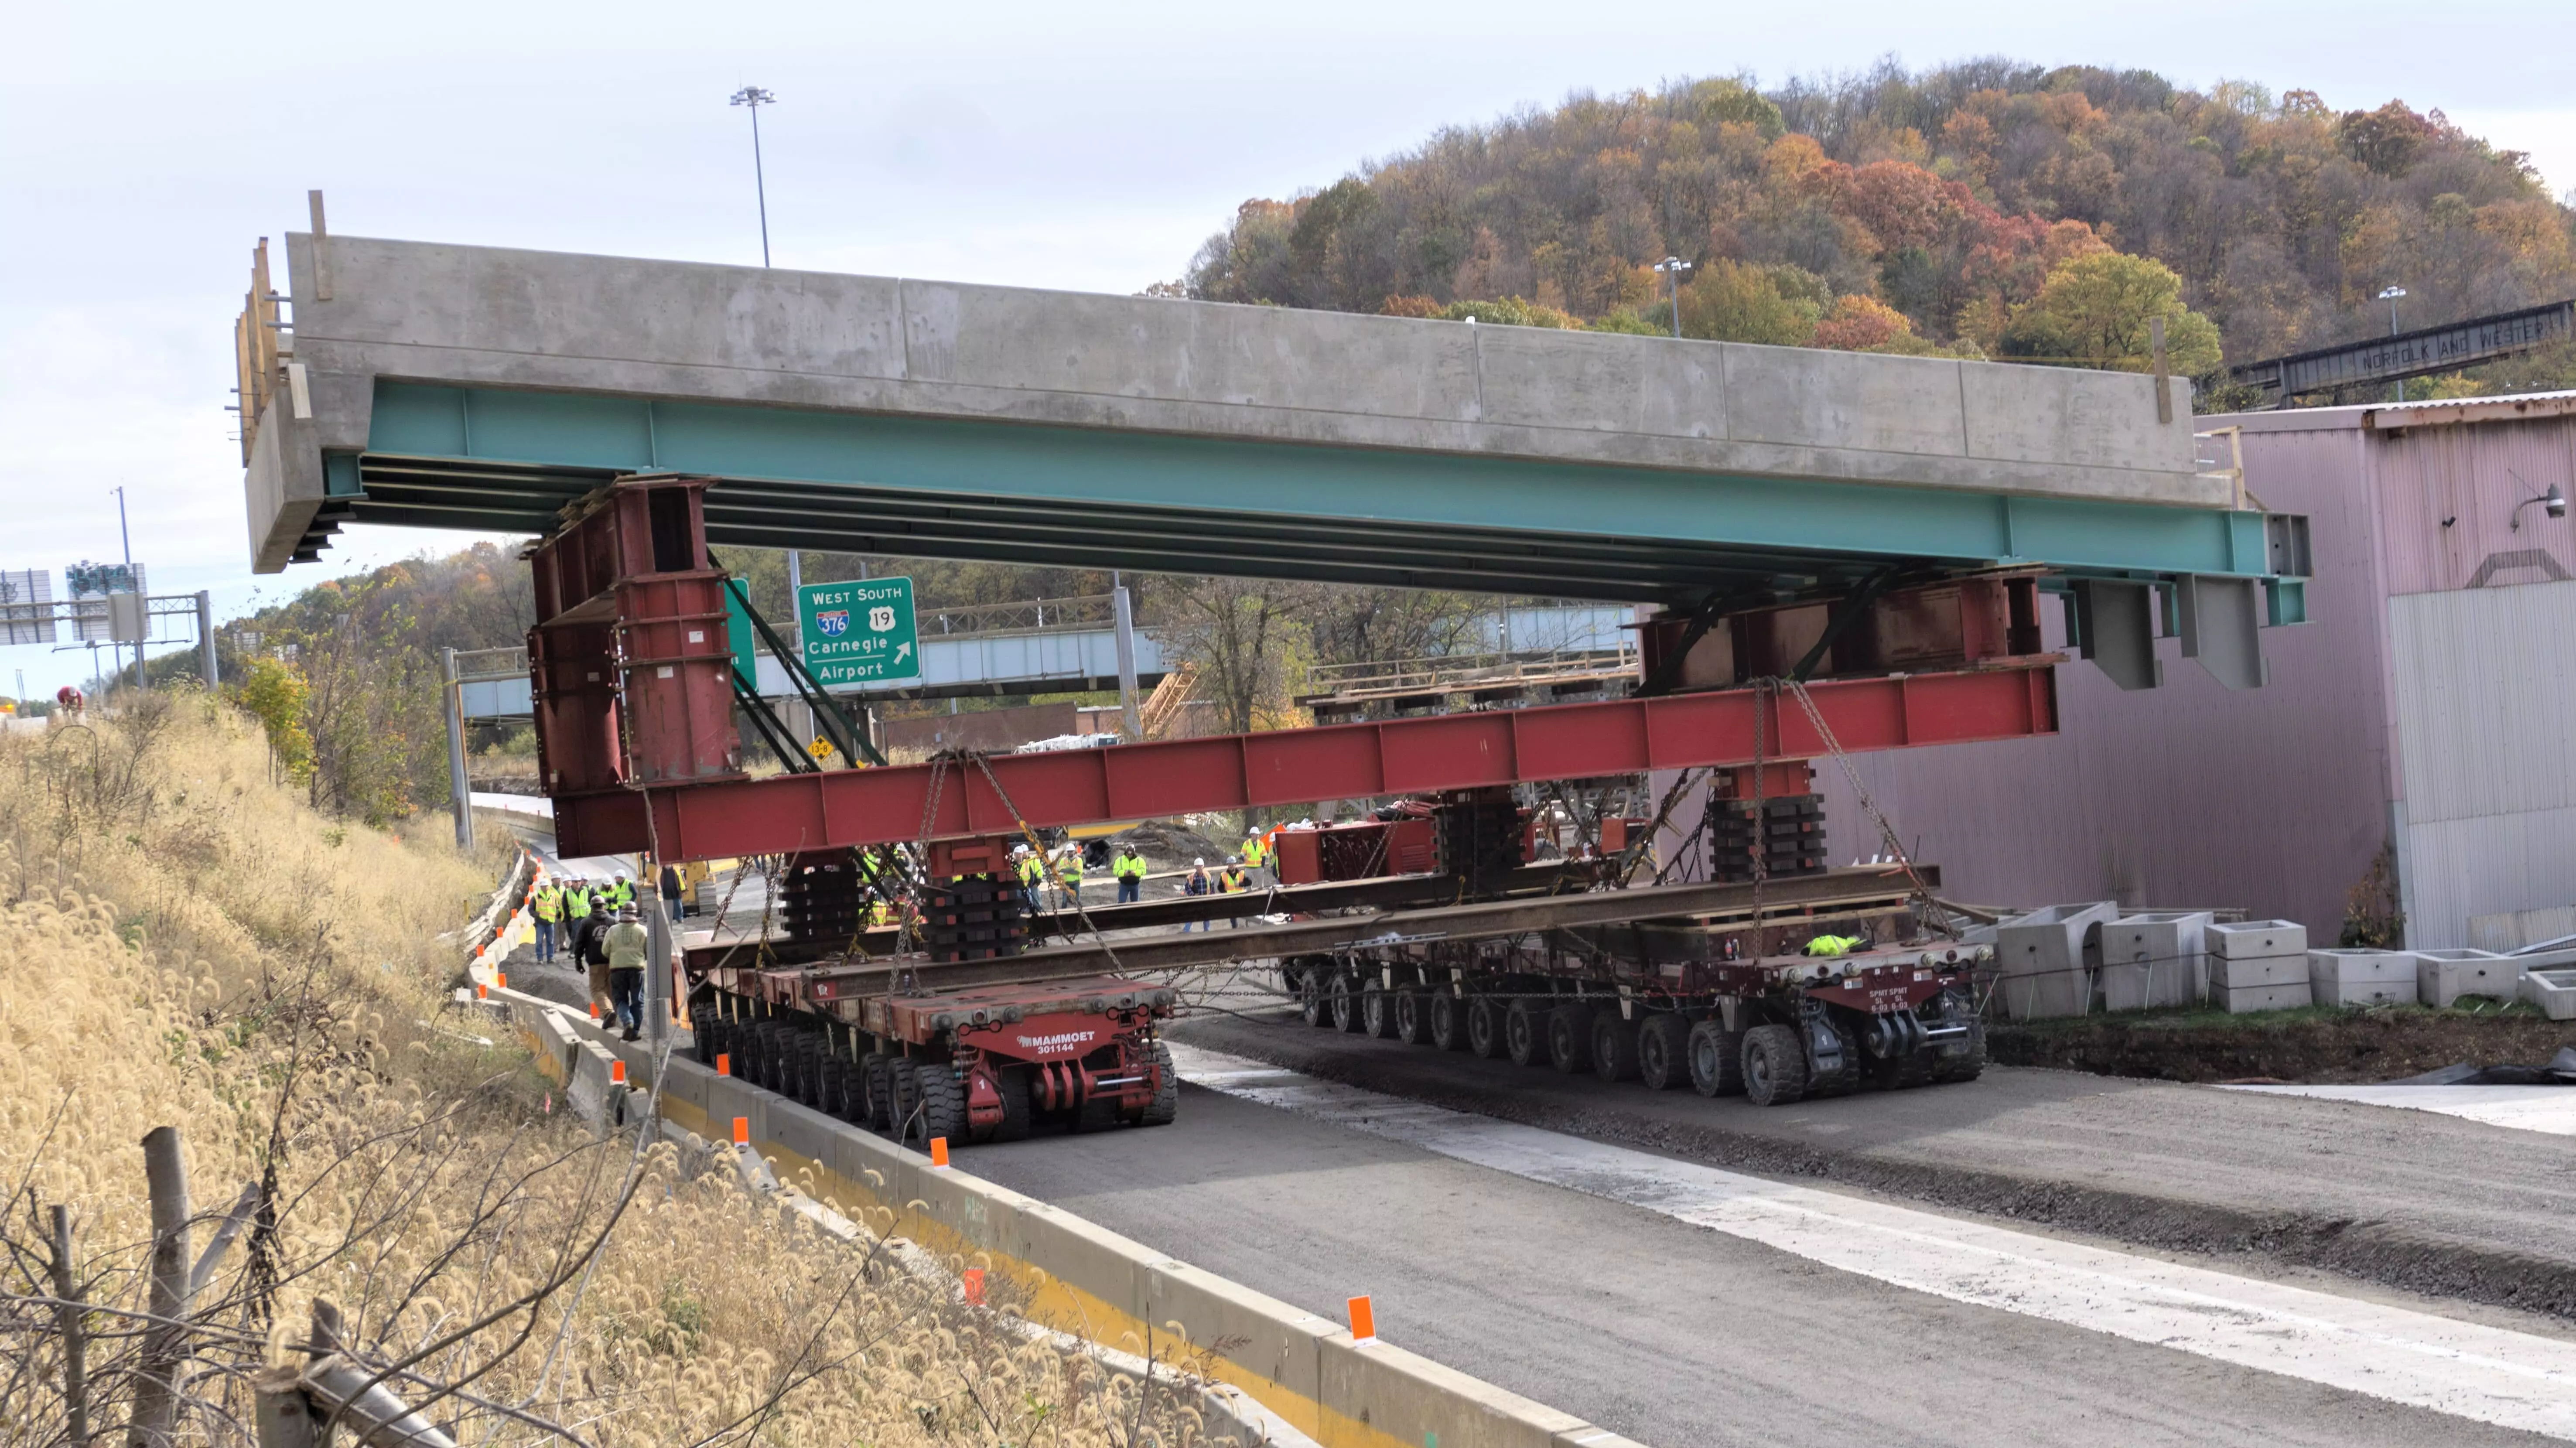 A concrete highway bridge segment is balanced atop a piece of transport equipment as wide as two lanes of traffic.